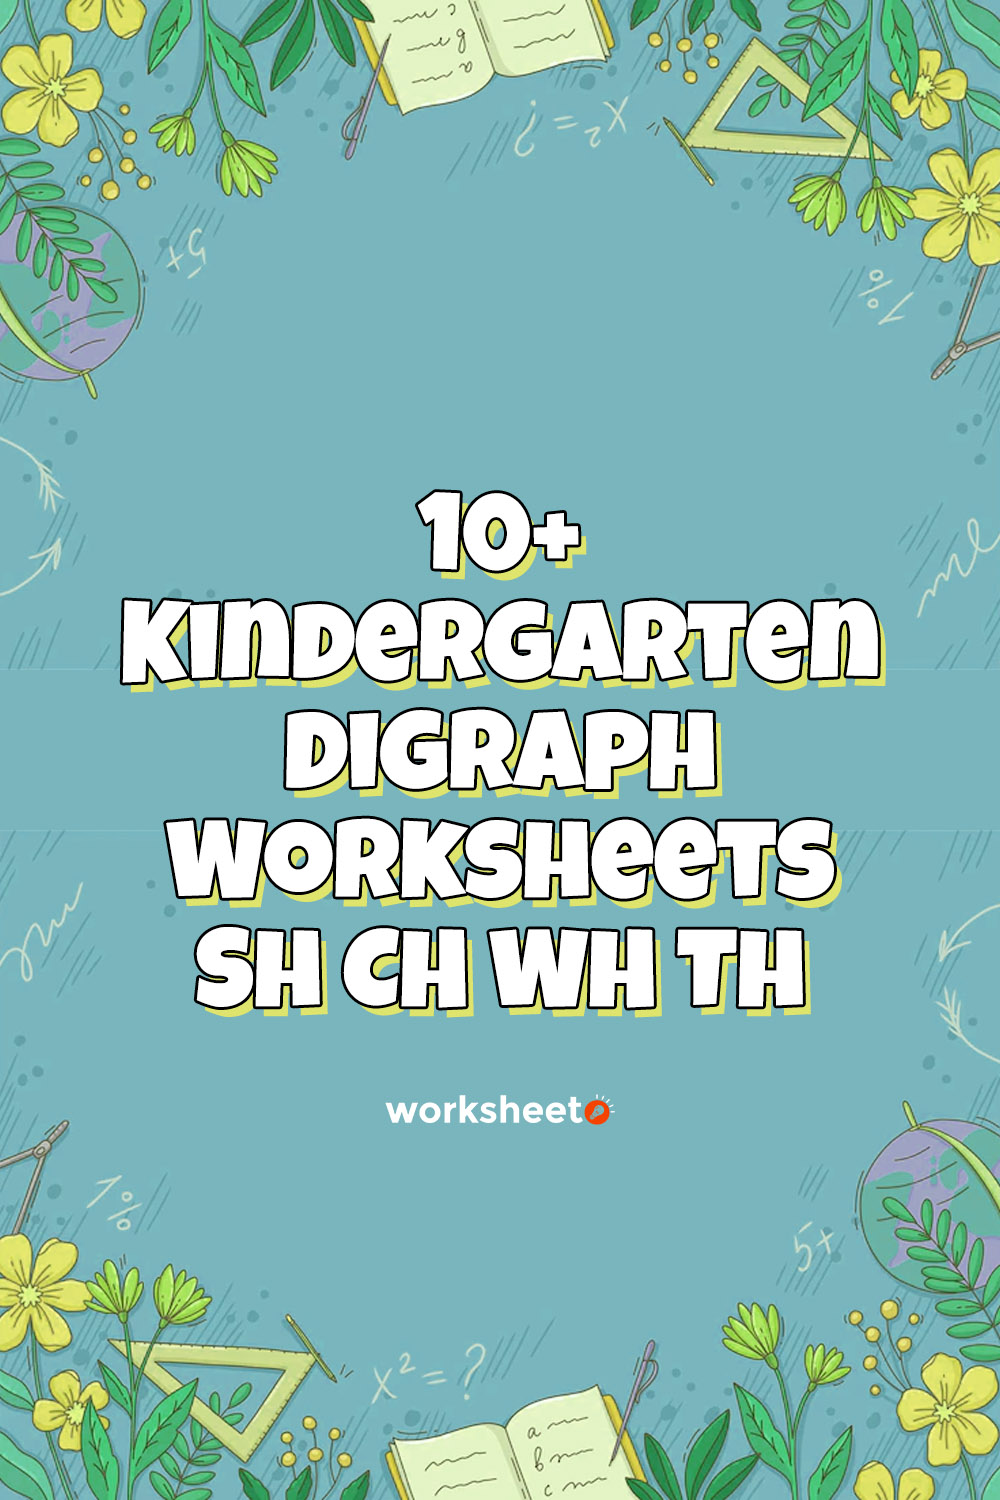 11 Images of Kindergarten Digraph Worksheets Sh CH WH Th